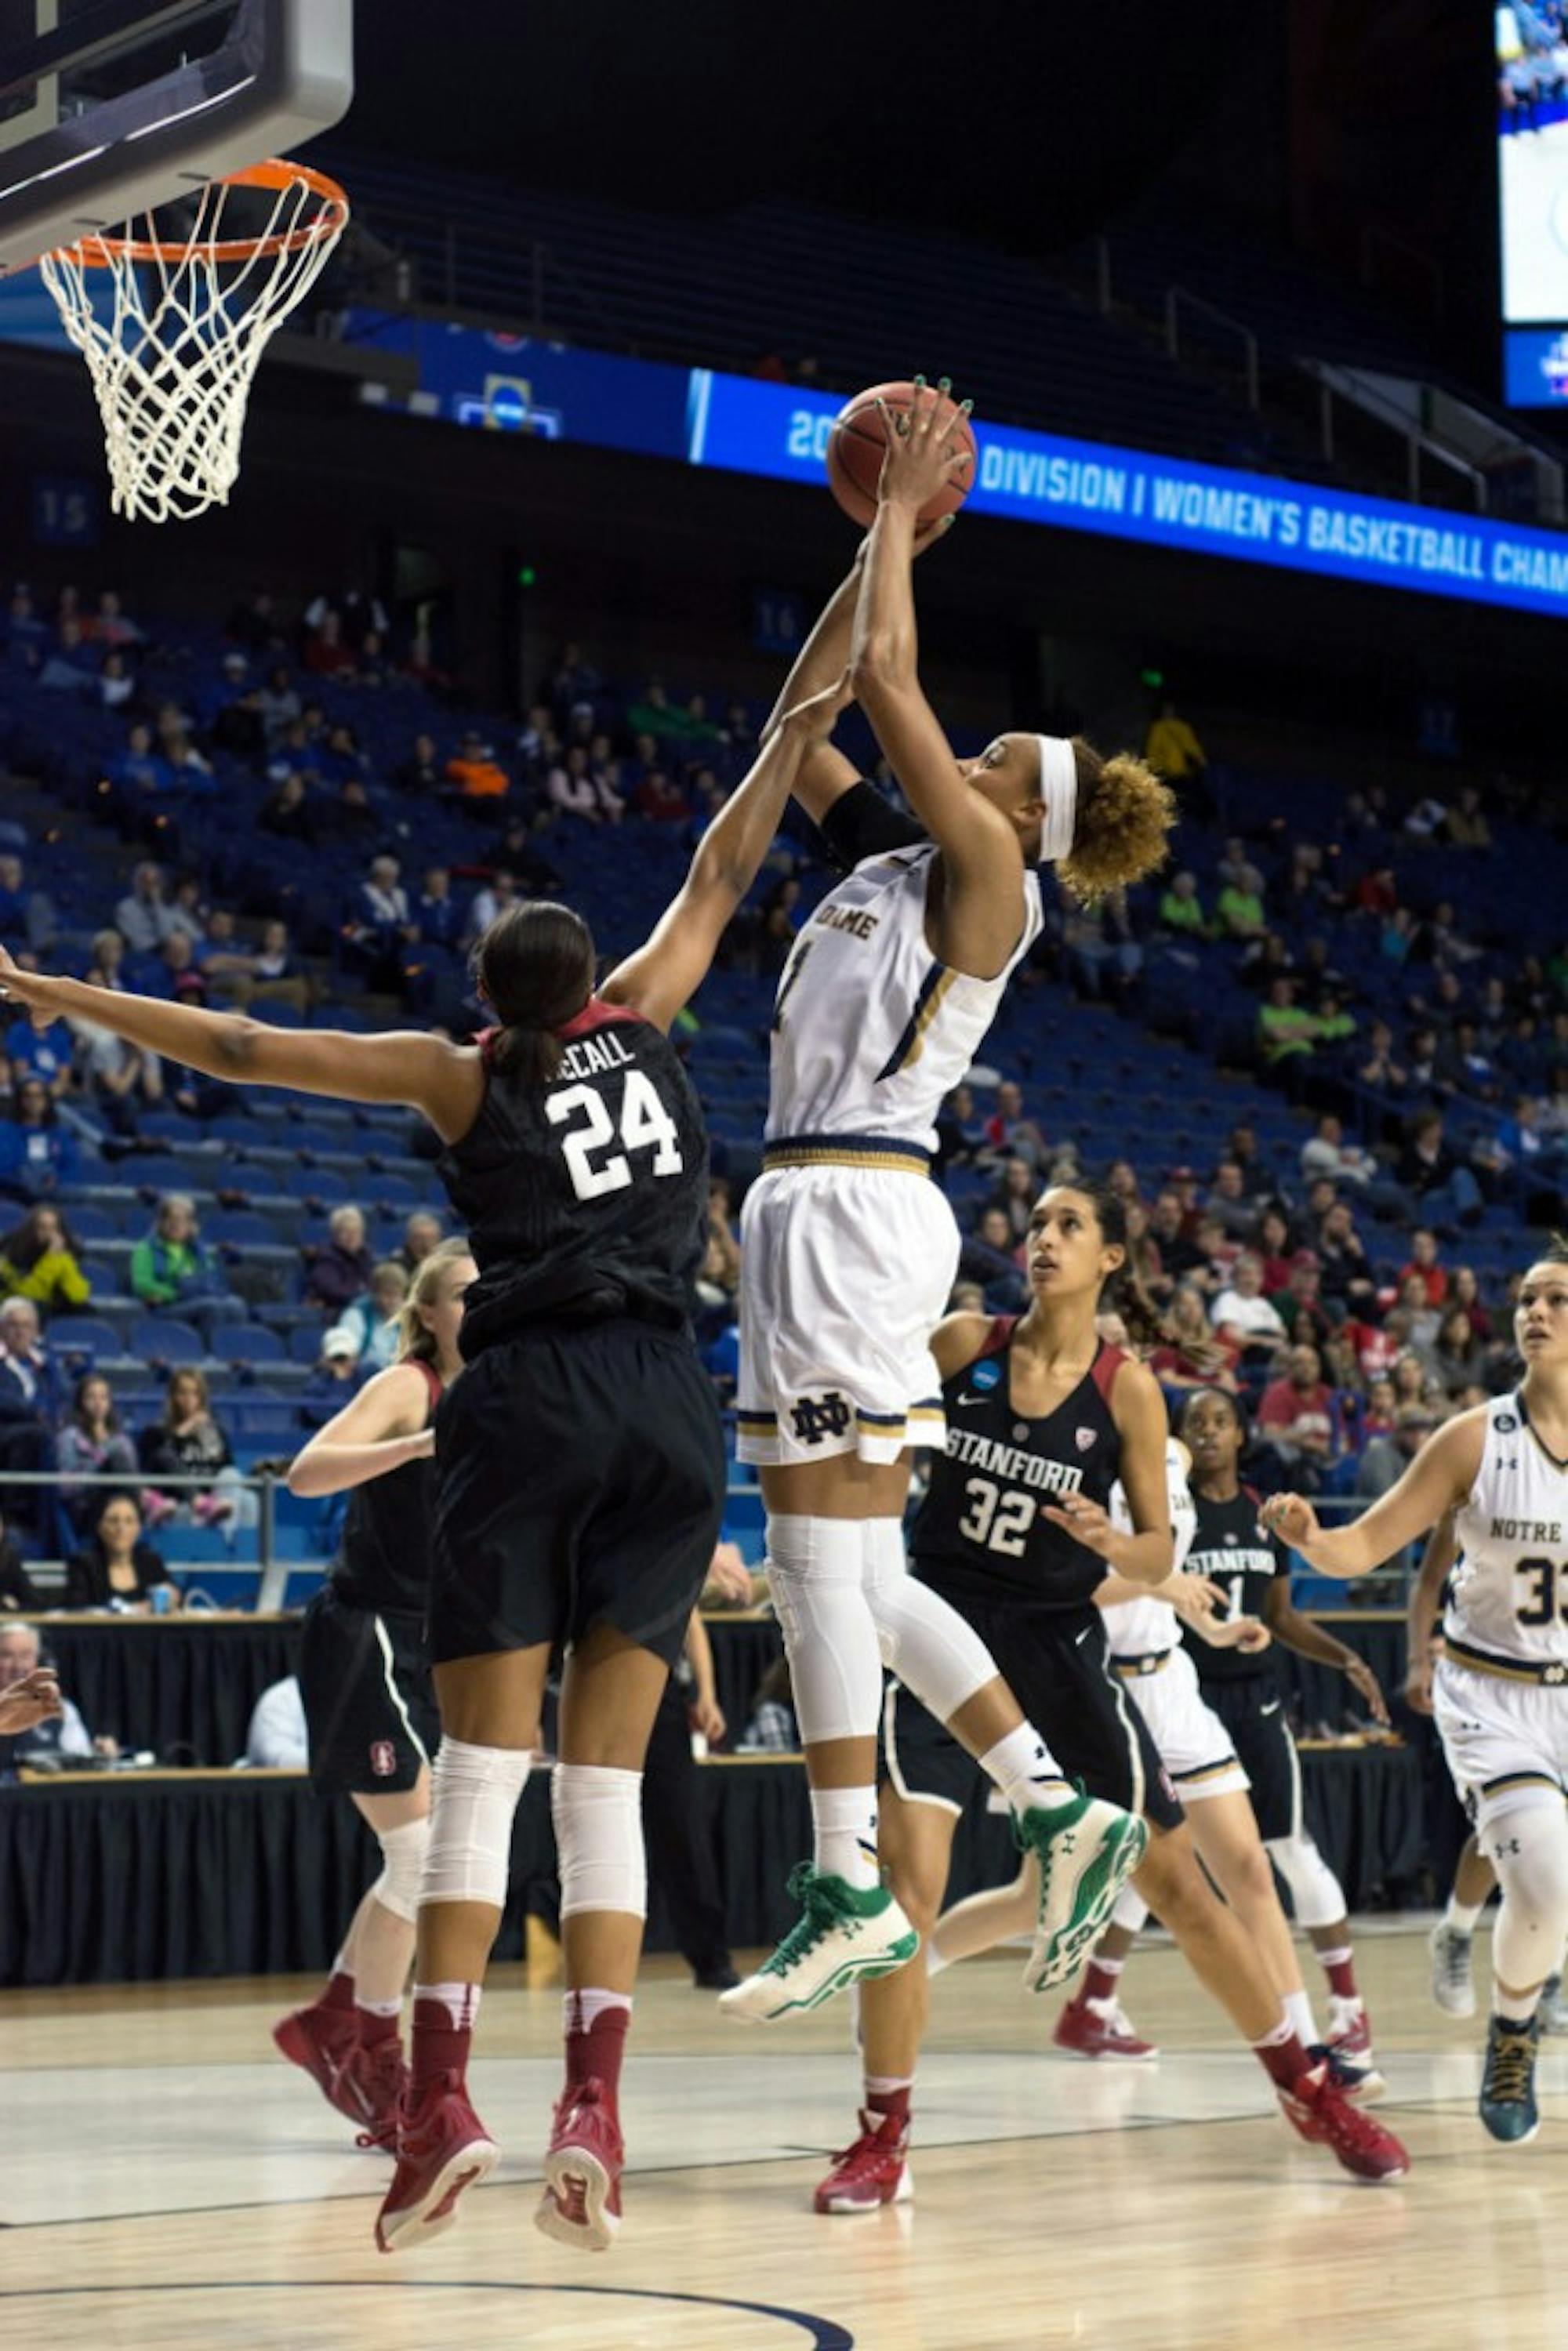 Irish sophomore forward Brianna Turner jumps over a defender for a layup during Notre Dame’s 90-84 loss to Stanford on March 25.